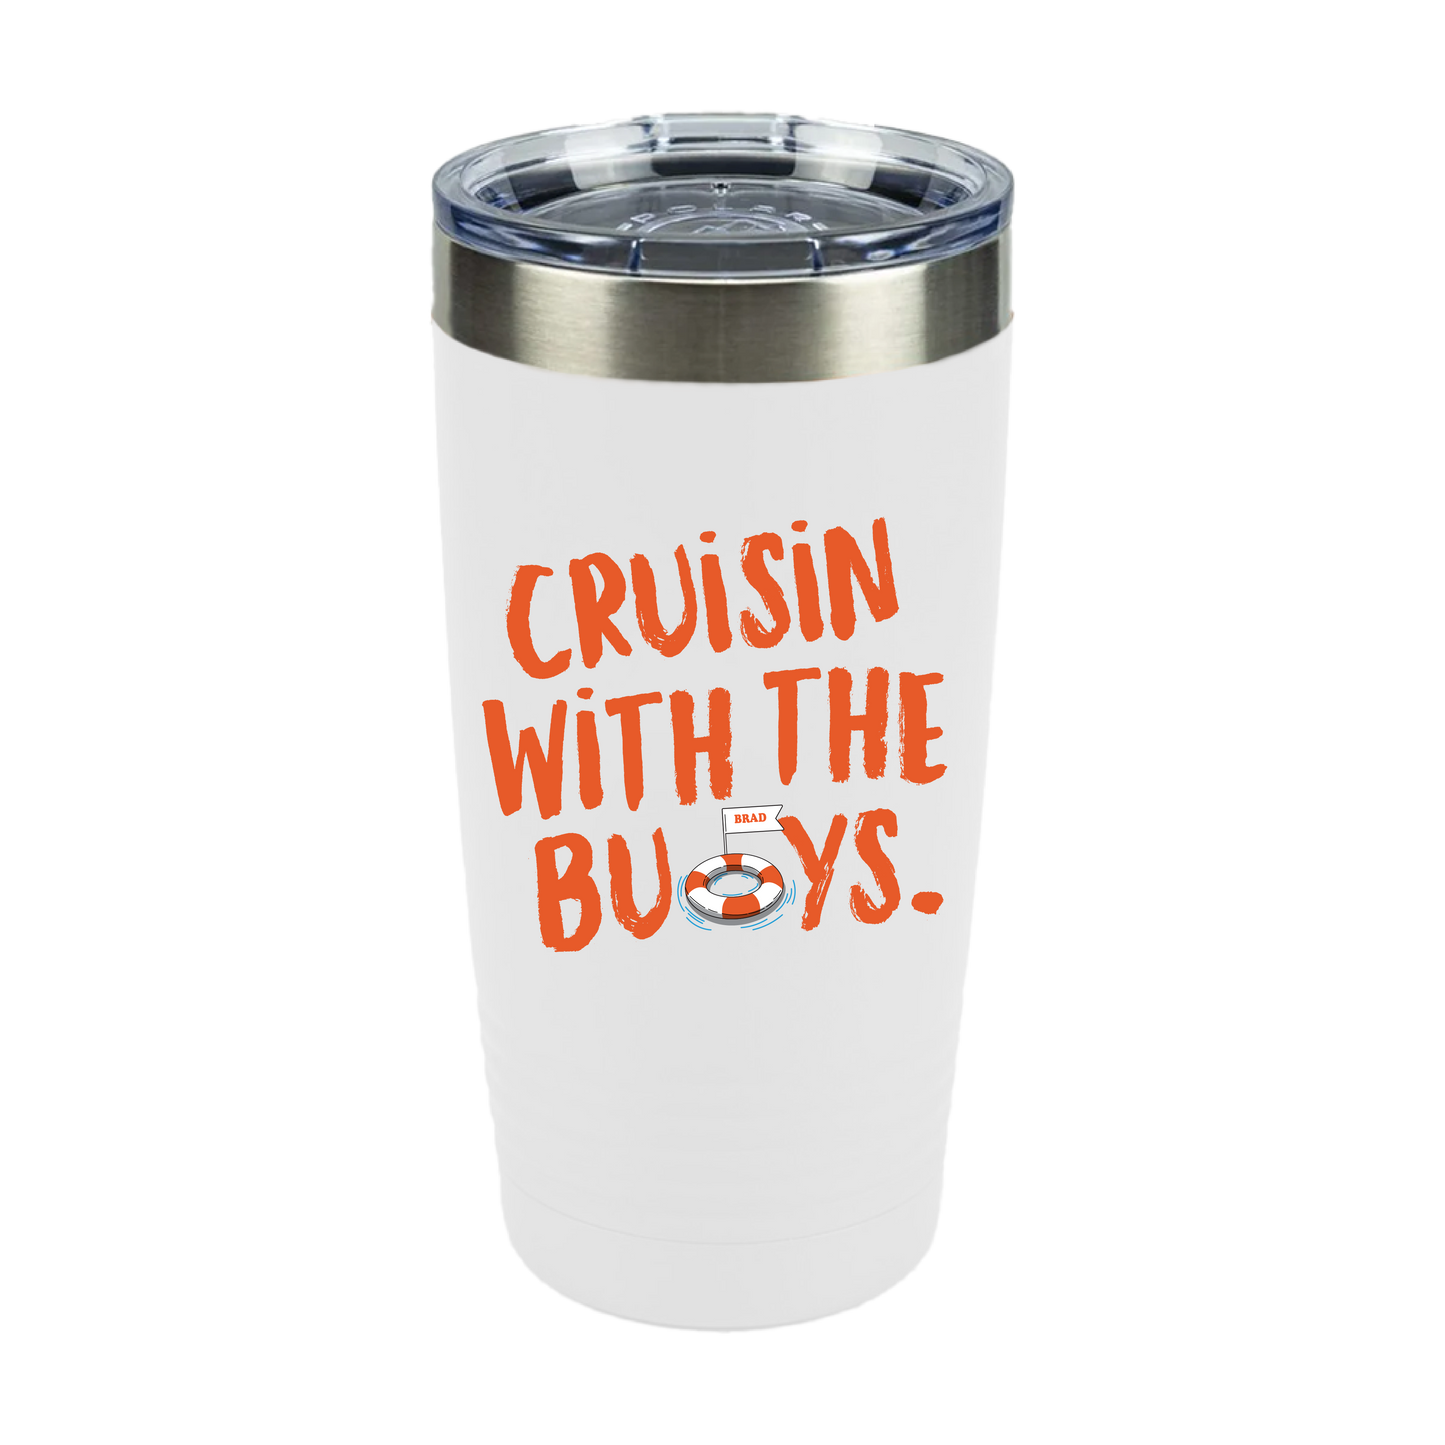 The Buoys - Personalized Insulated Water Tumbler